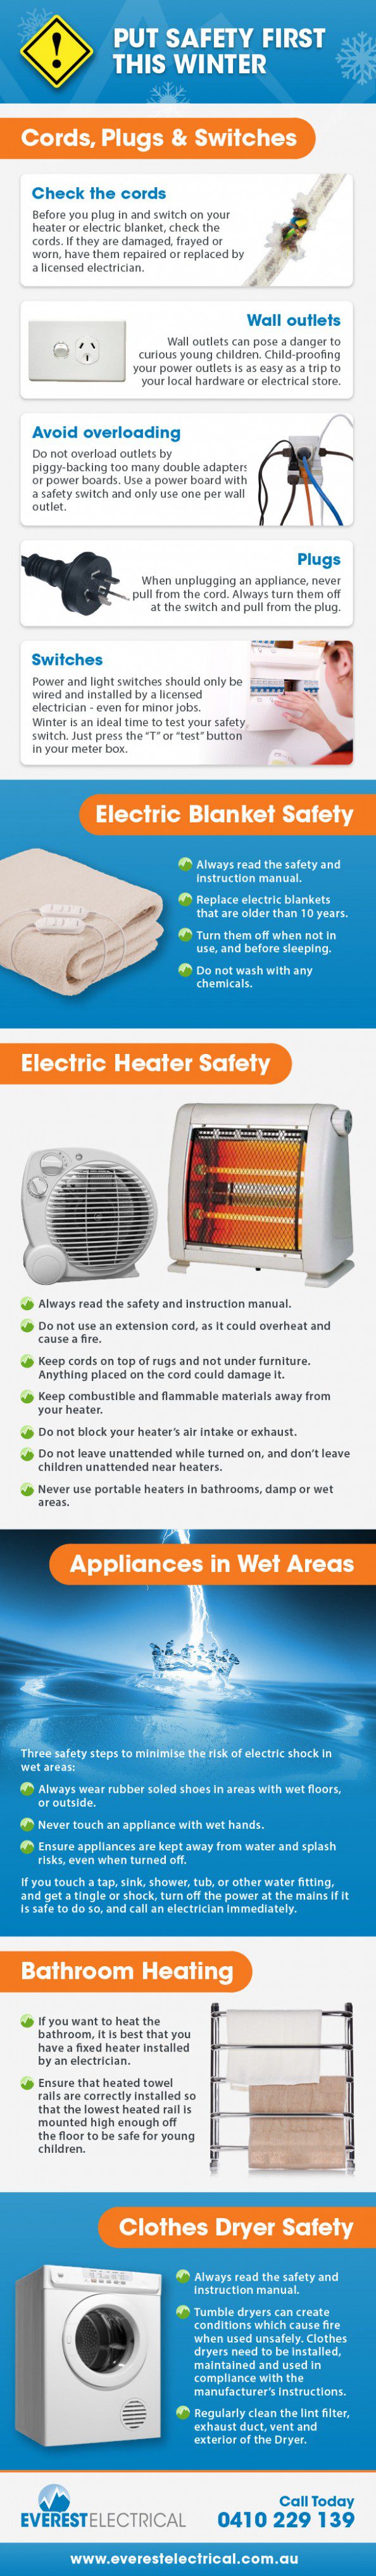 Winter Safety and Heating Electricity